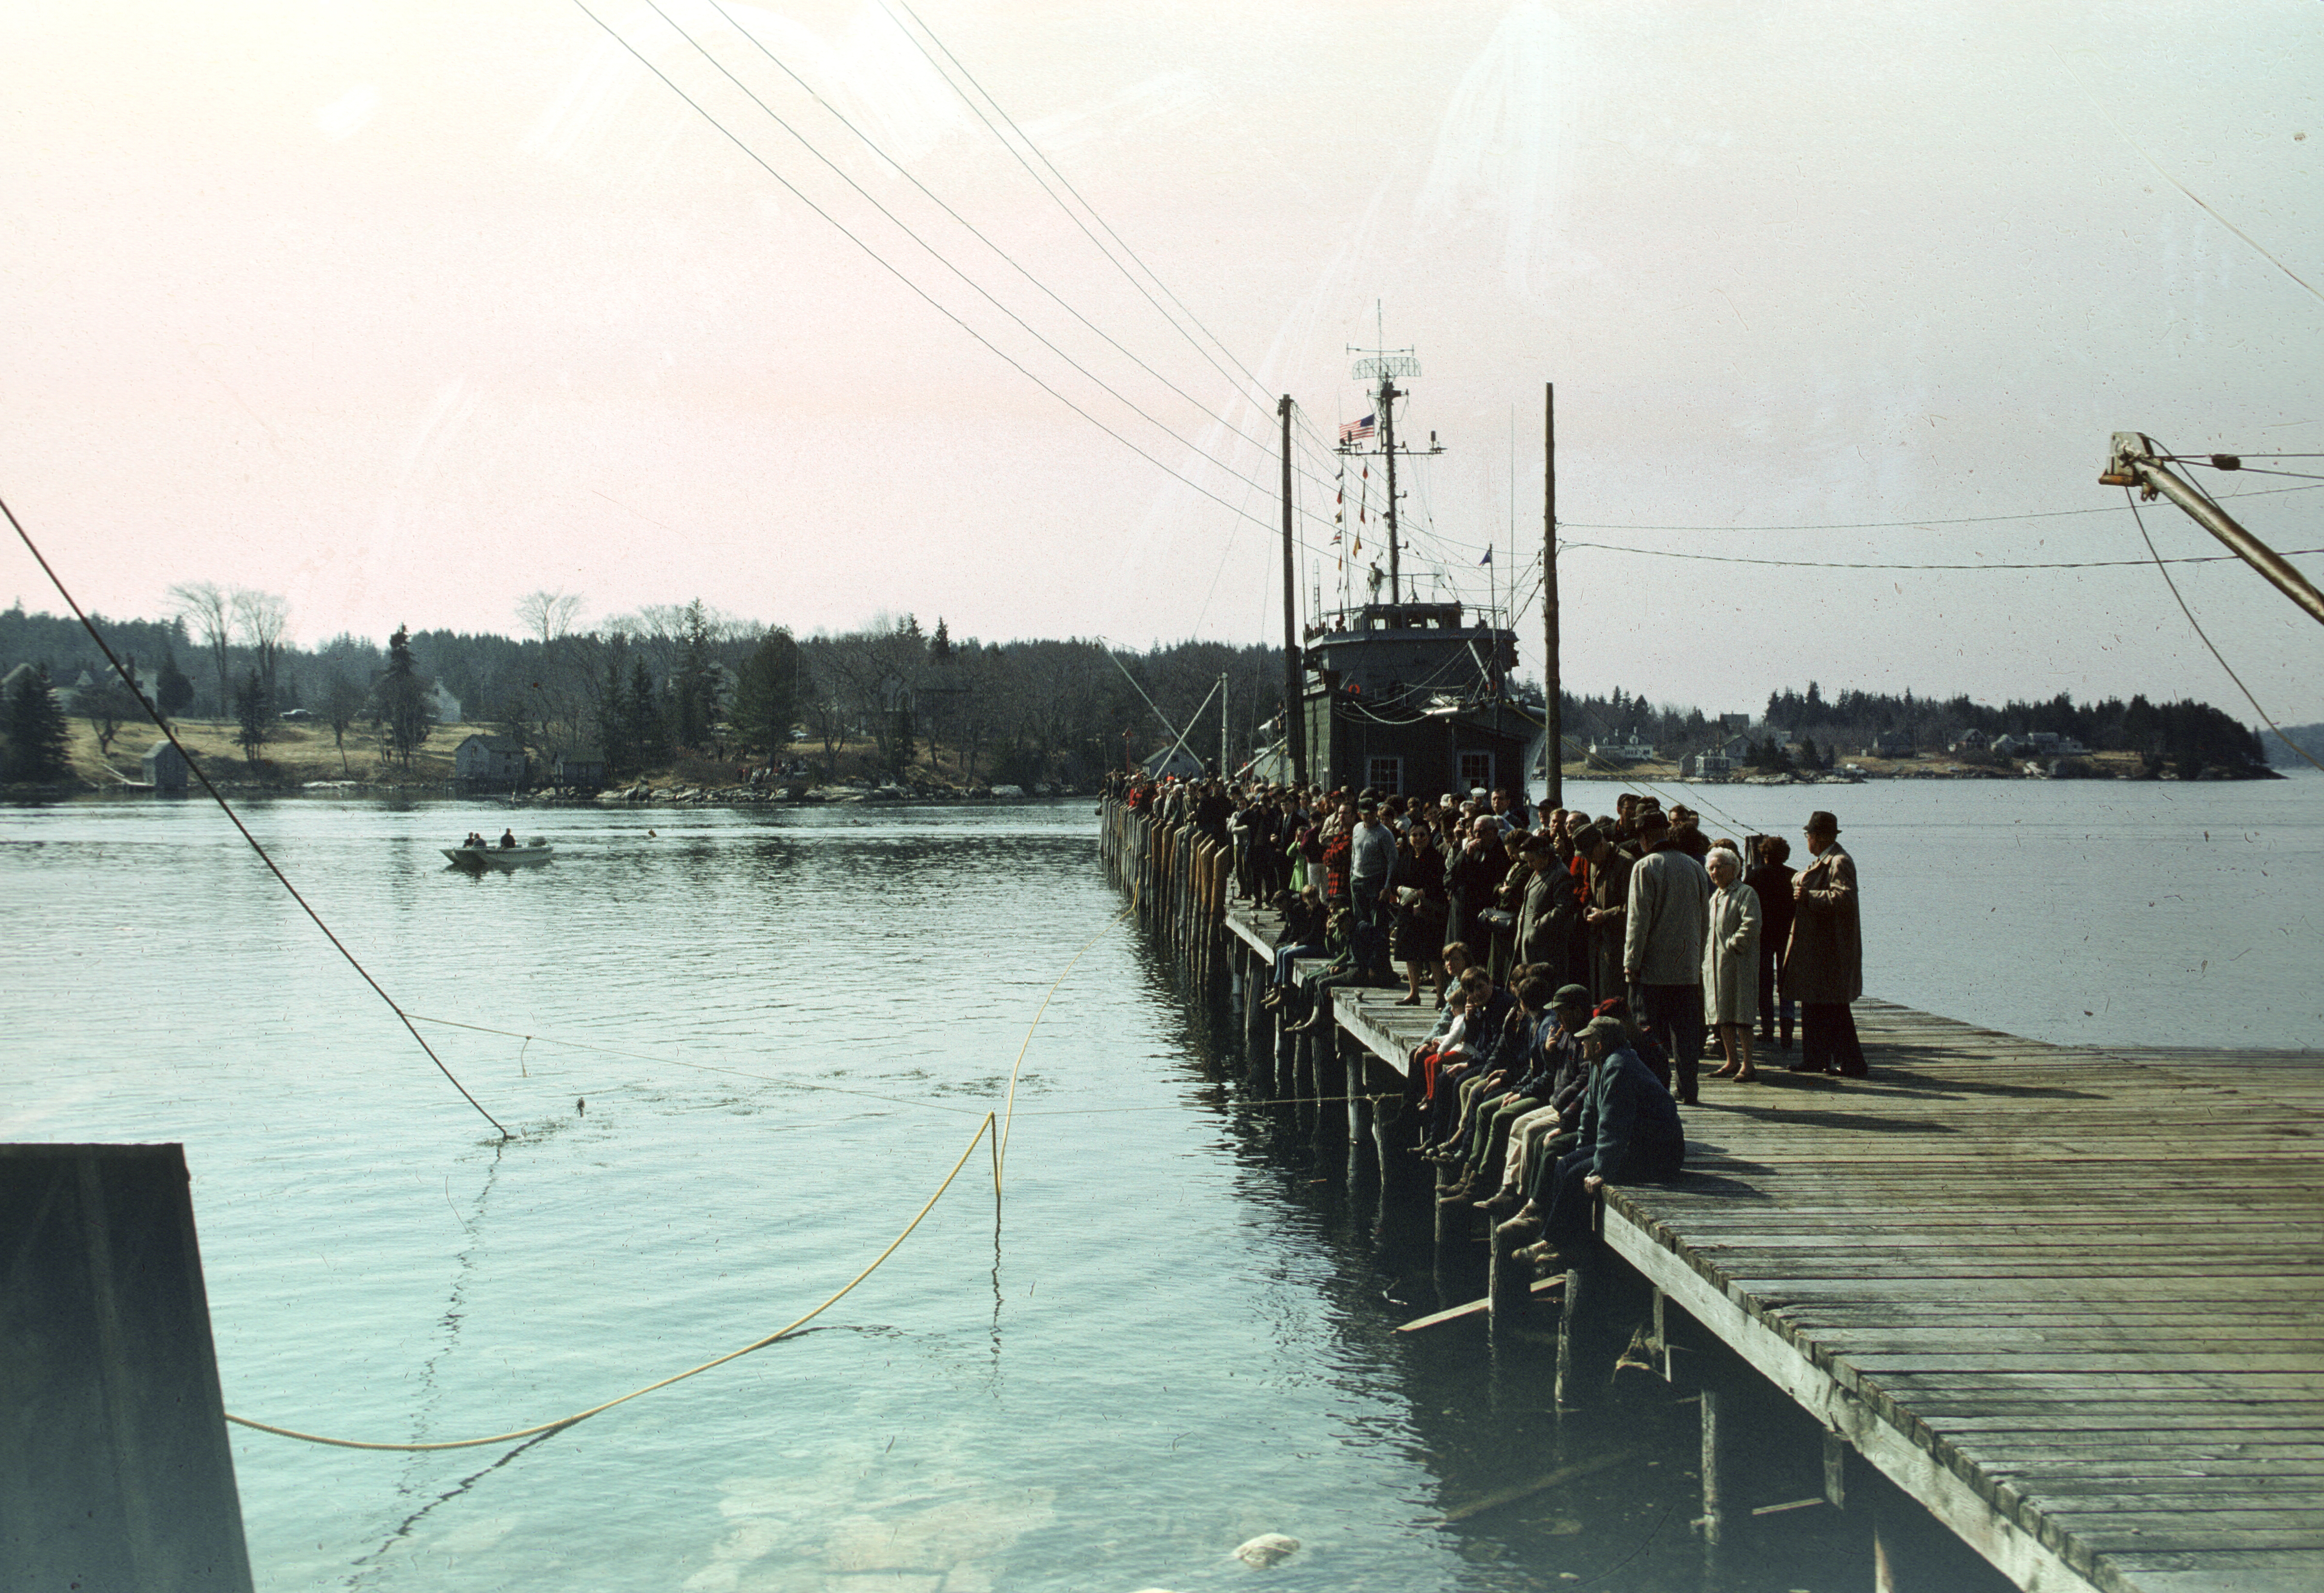 People gathered on a dock.